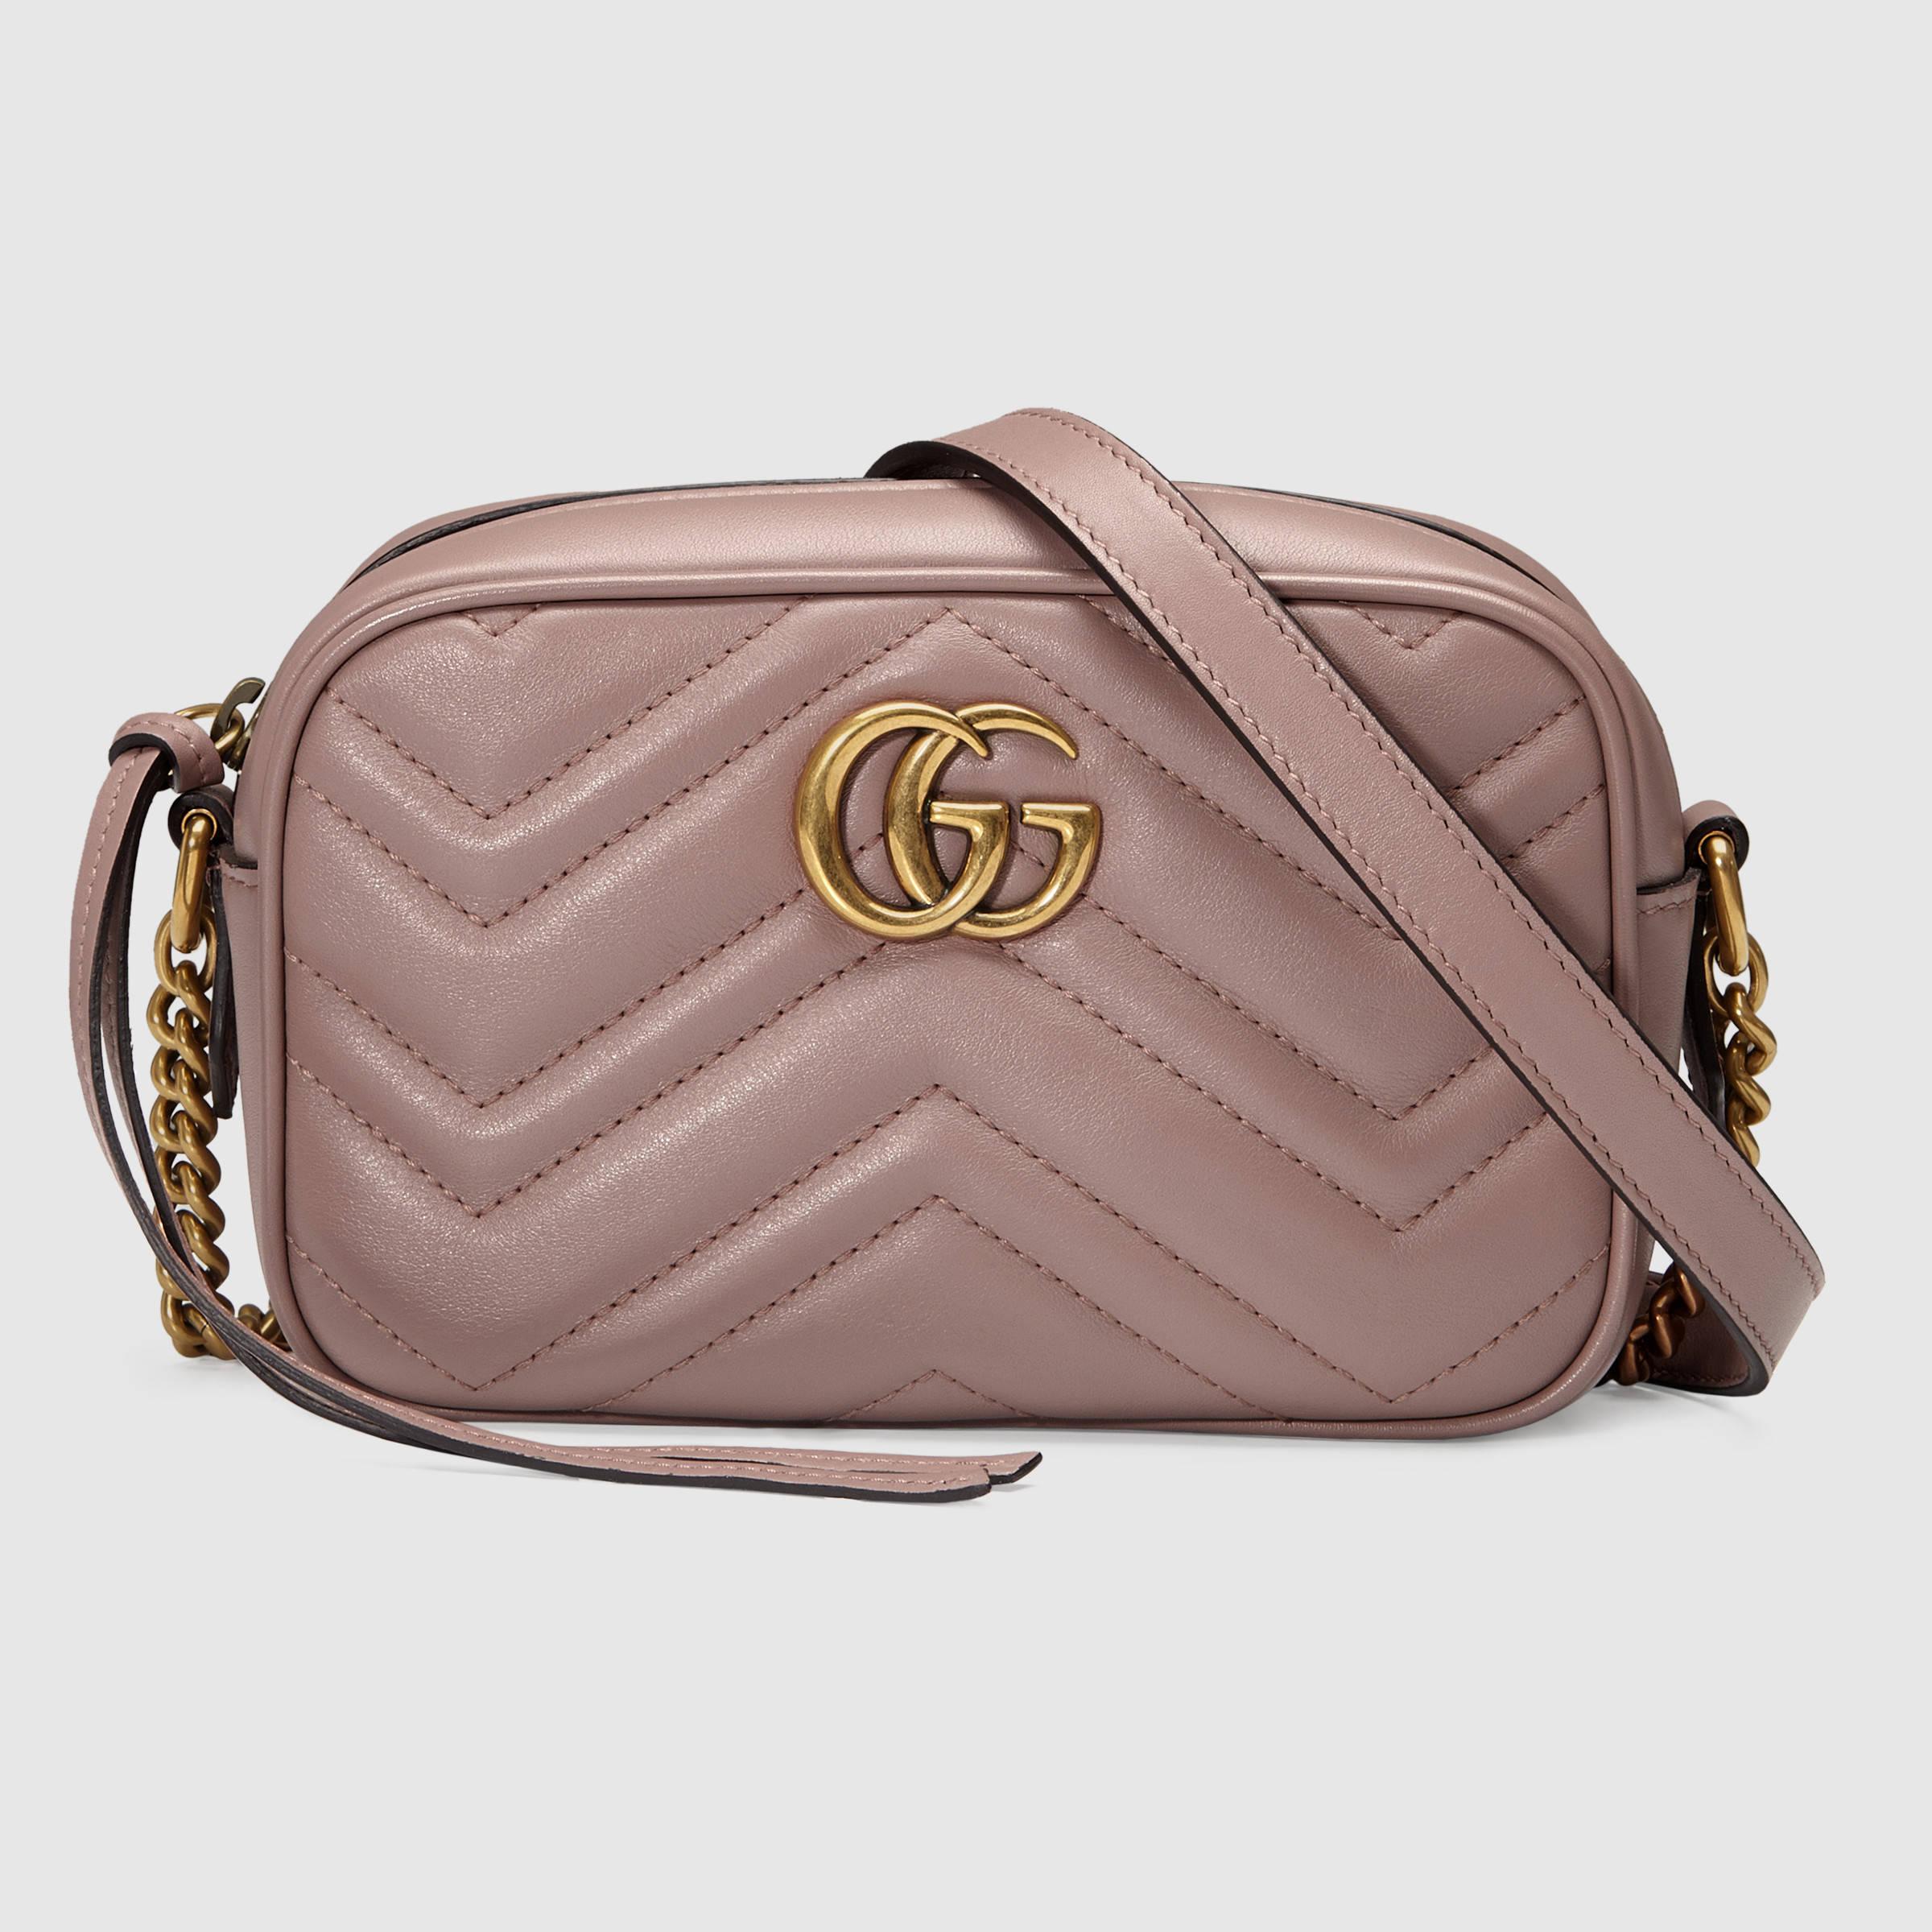 Gucci GG Marmont Matelassé Leather Shoulder Bag in Pink - Lyst